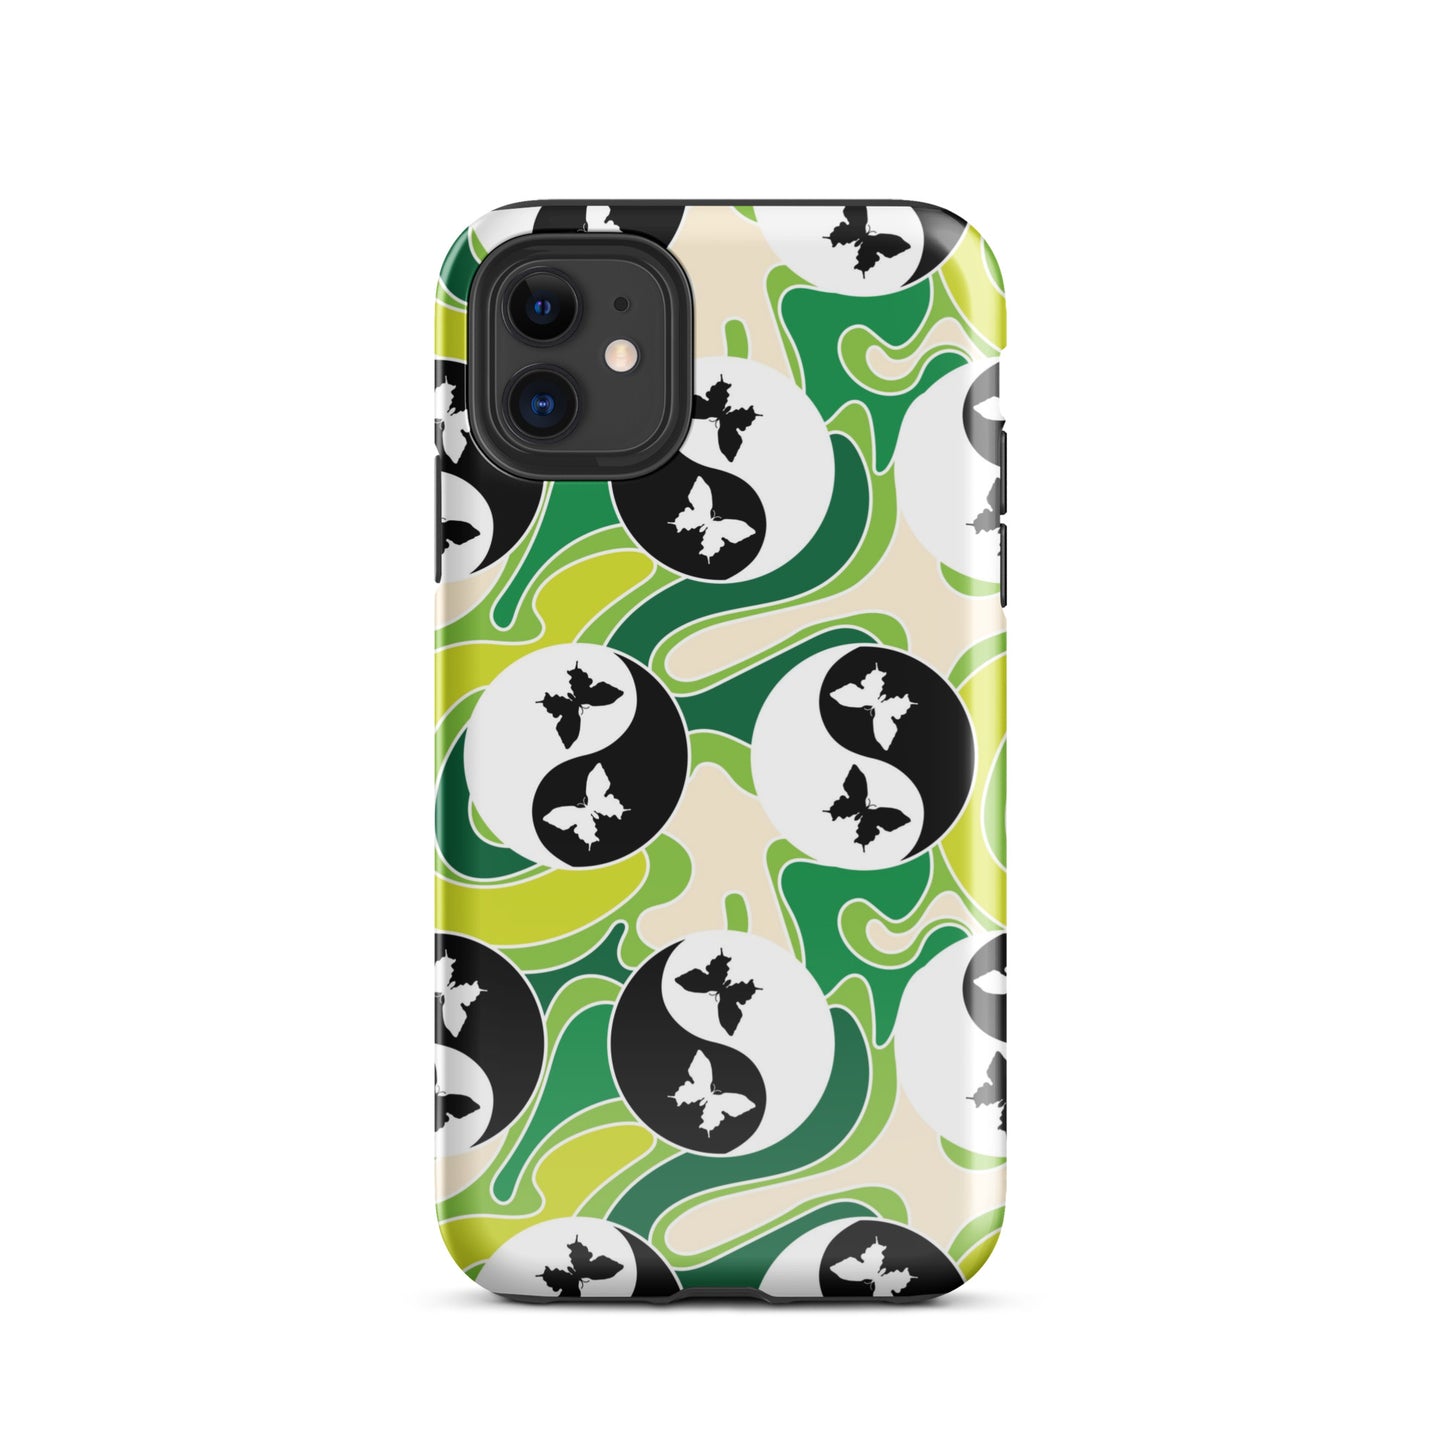 Yin Yang Butterfly iPhone Case Glossy iPhone 11